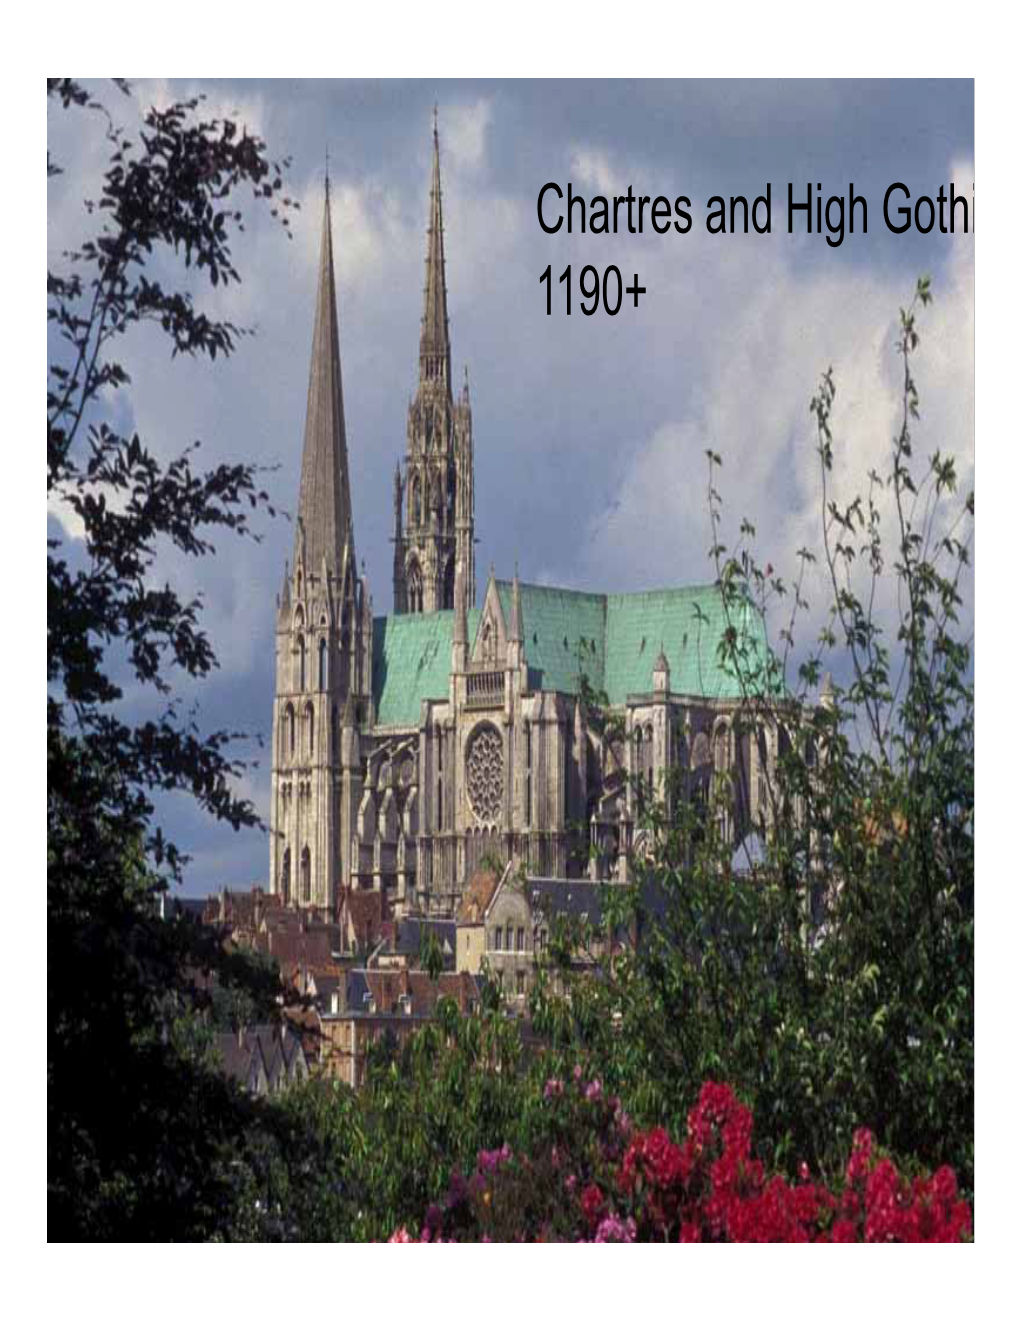 Chartres and High Gothi 1190+ the “High Gothic” Cathedrals